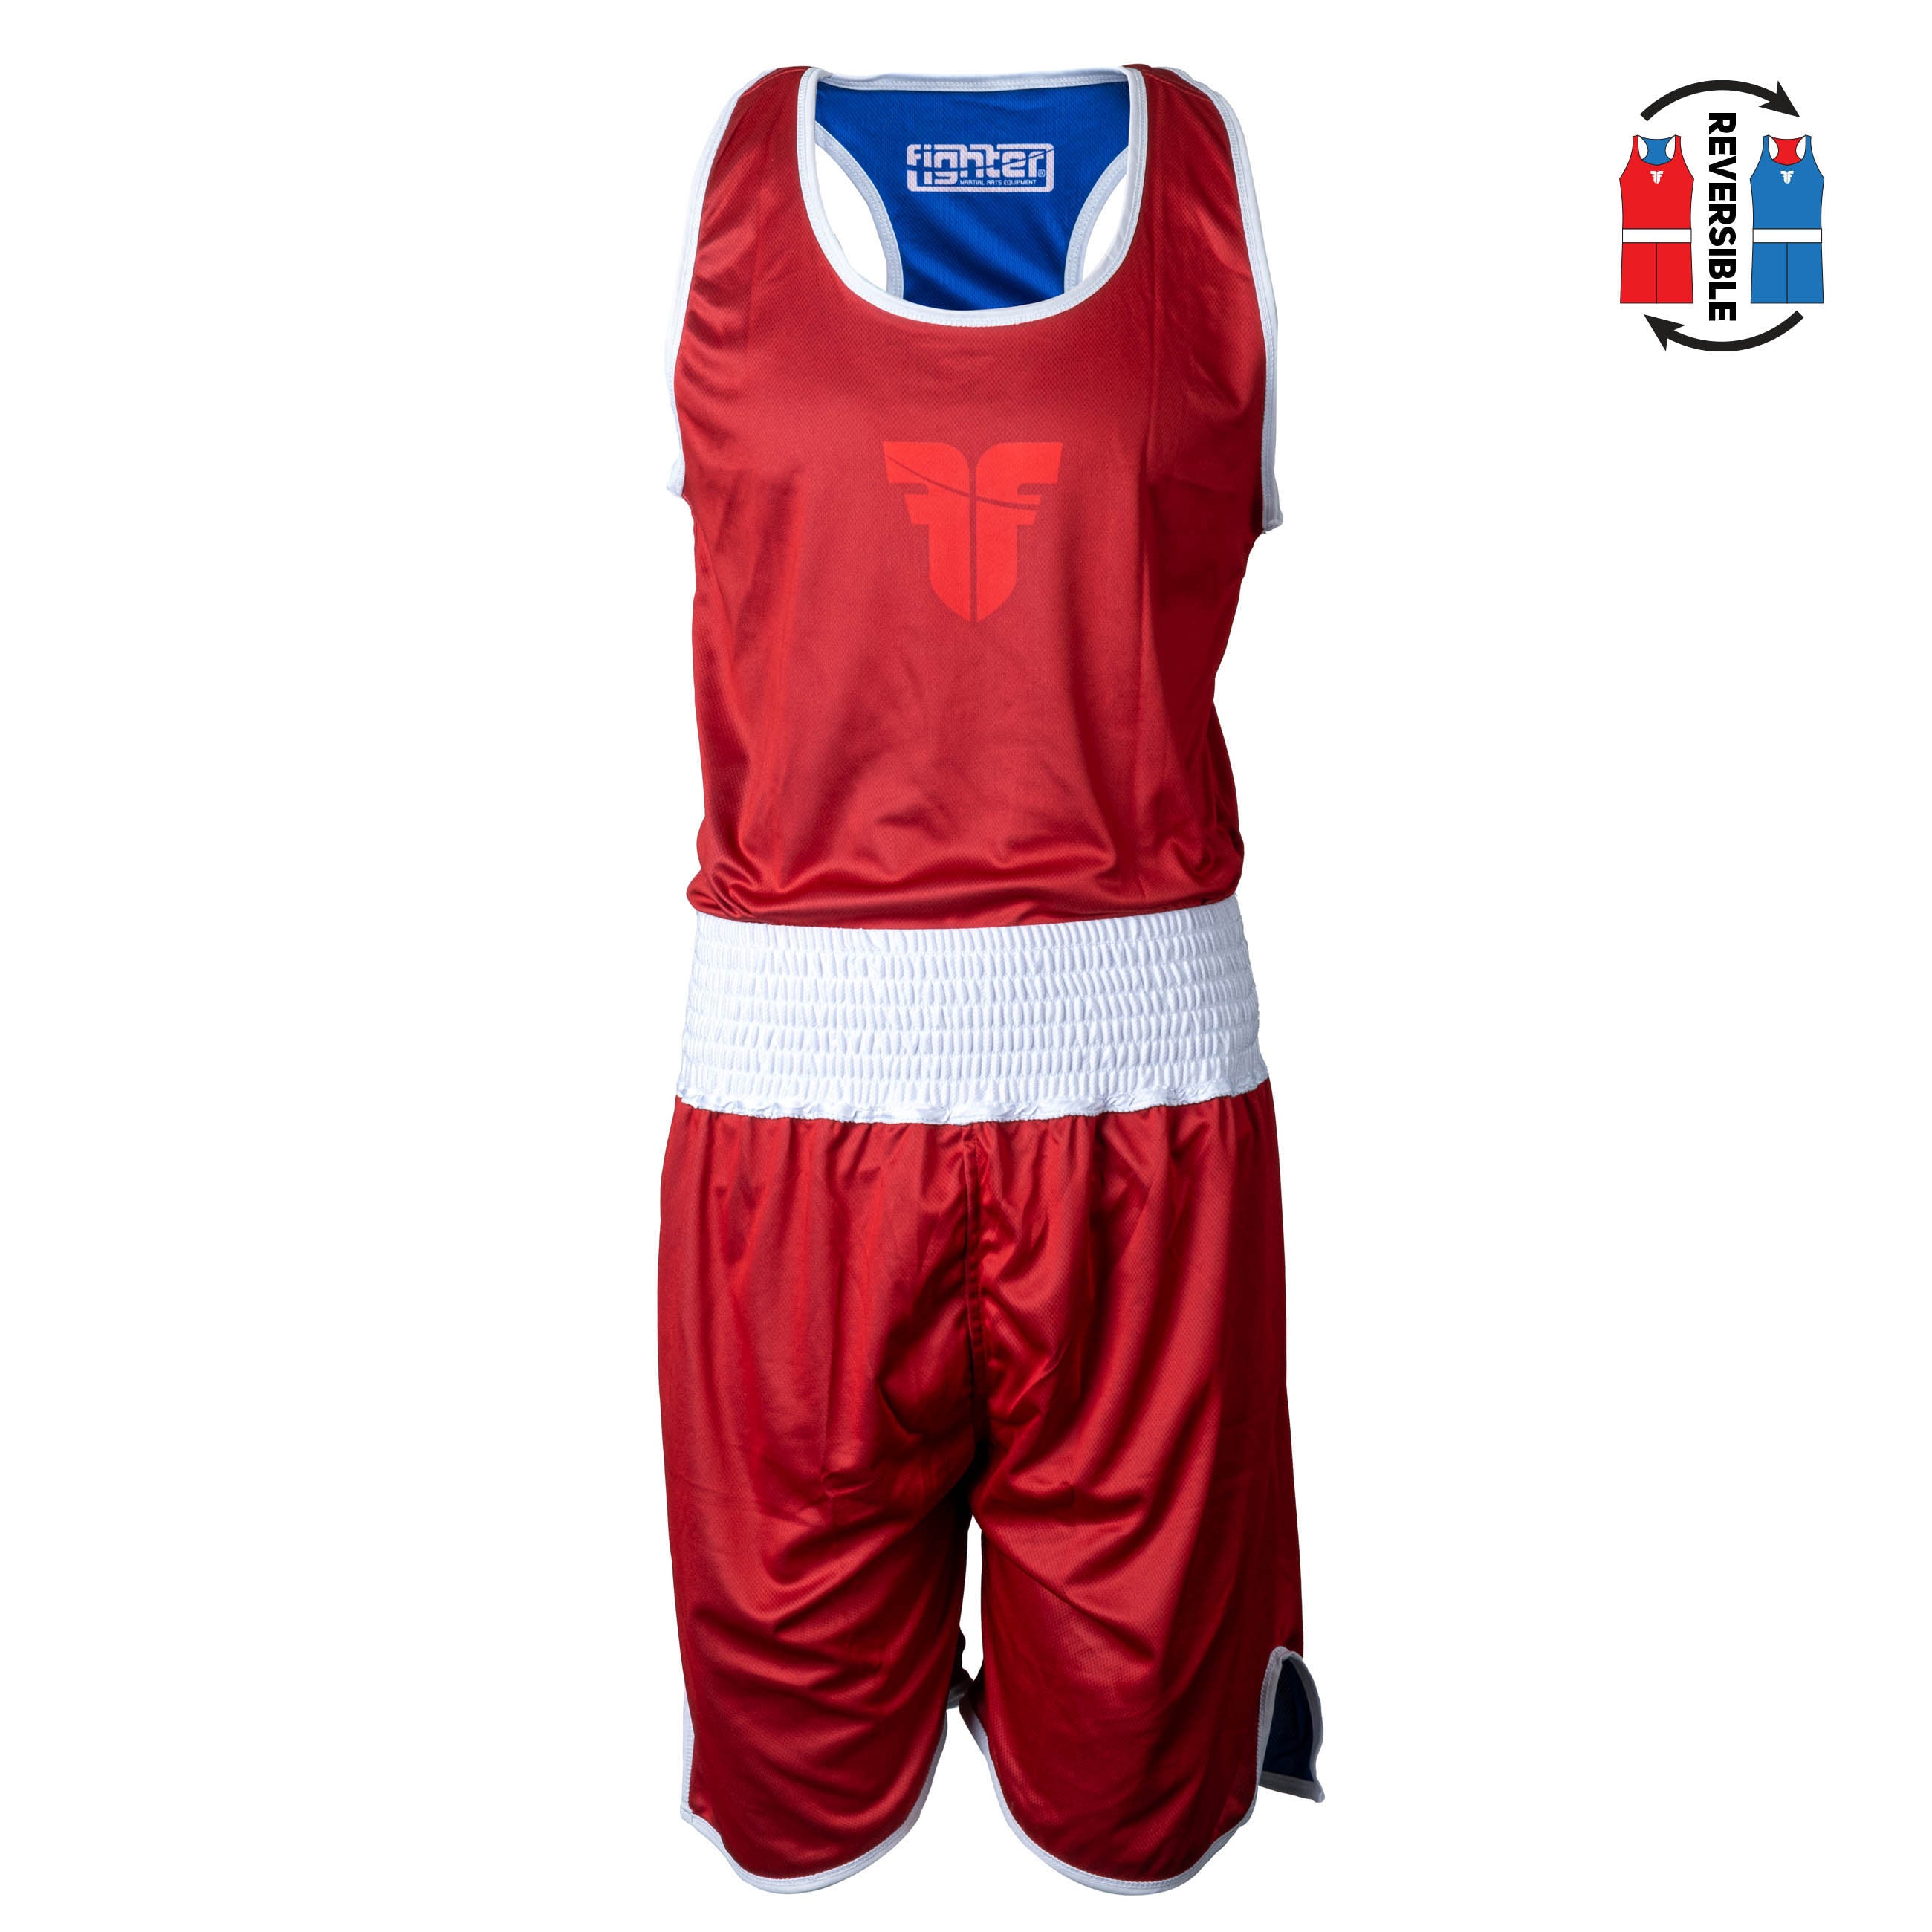 Fighter Double Sided Boxing Jersey, red/blue, RBSF-0304